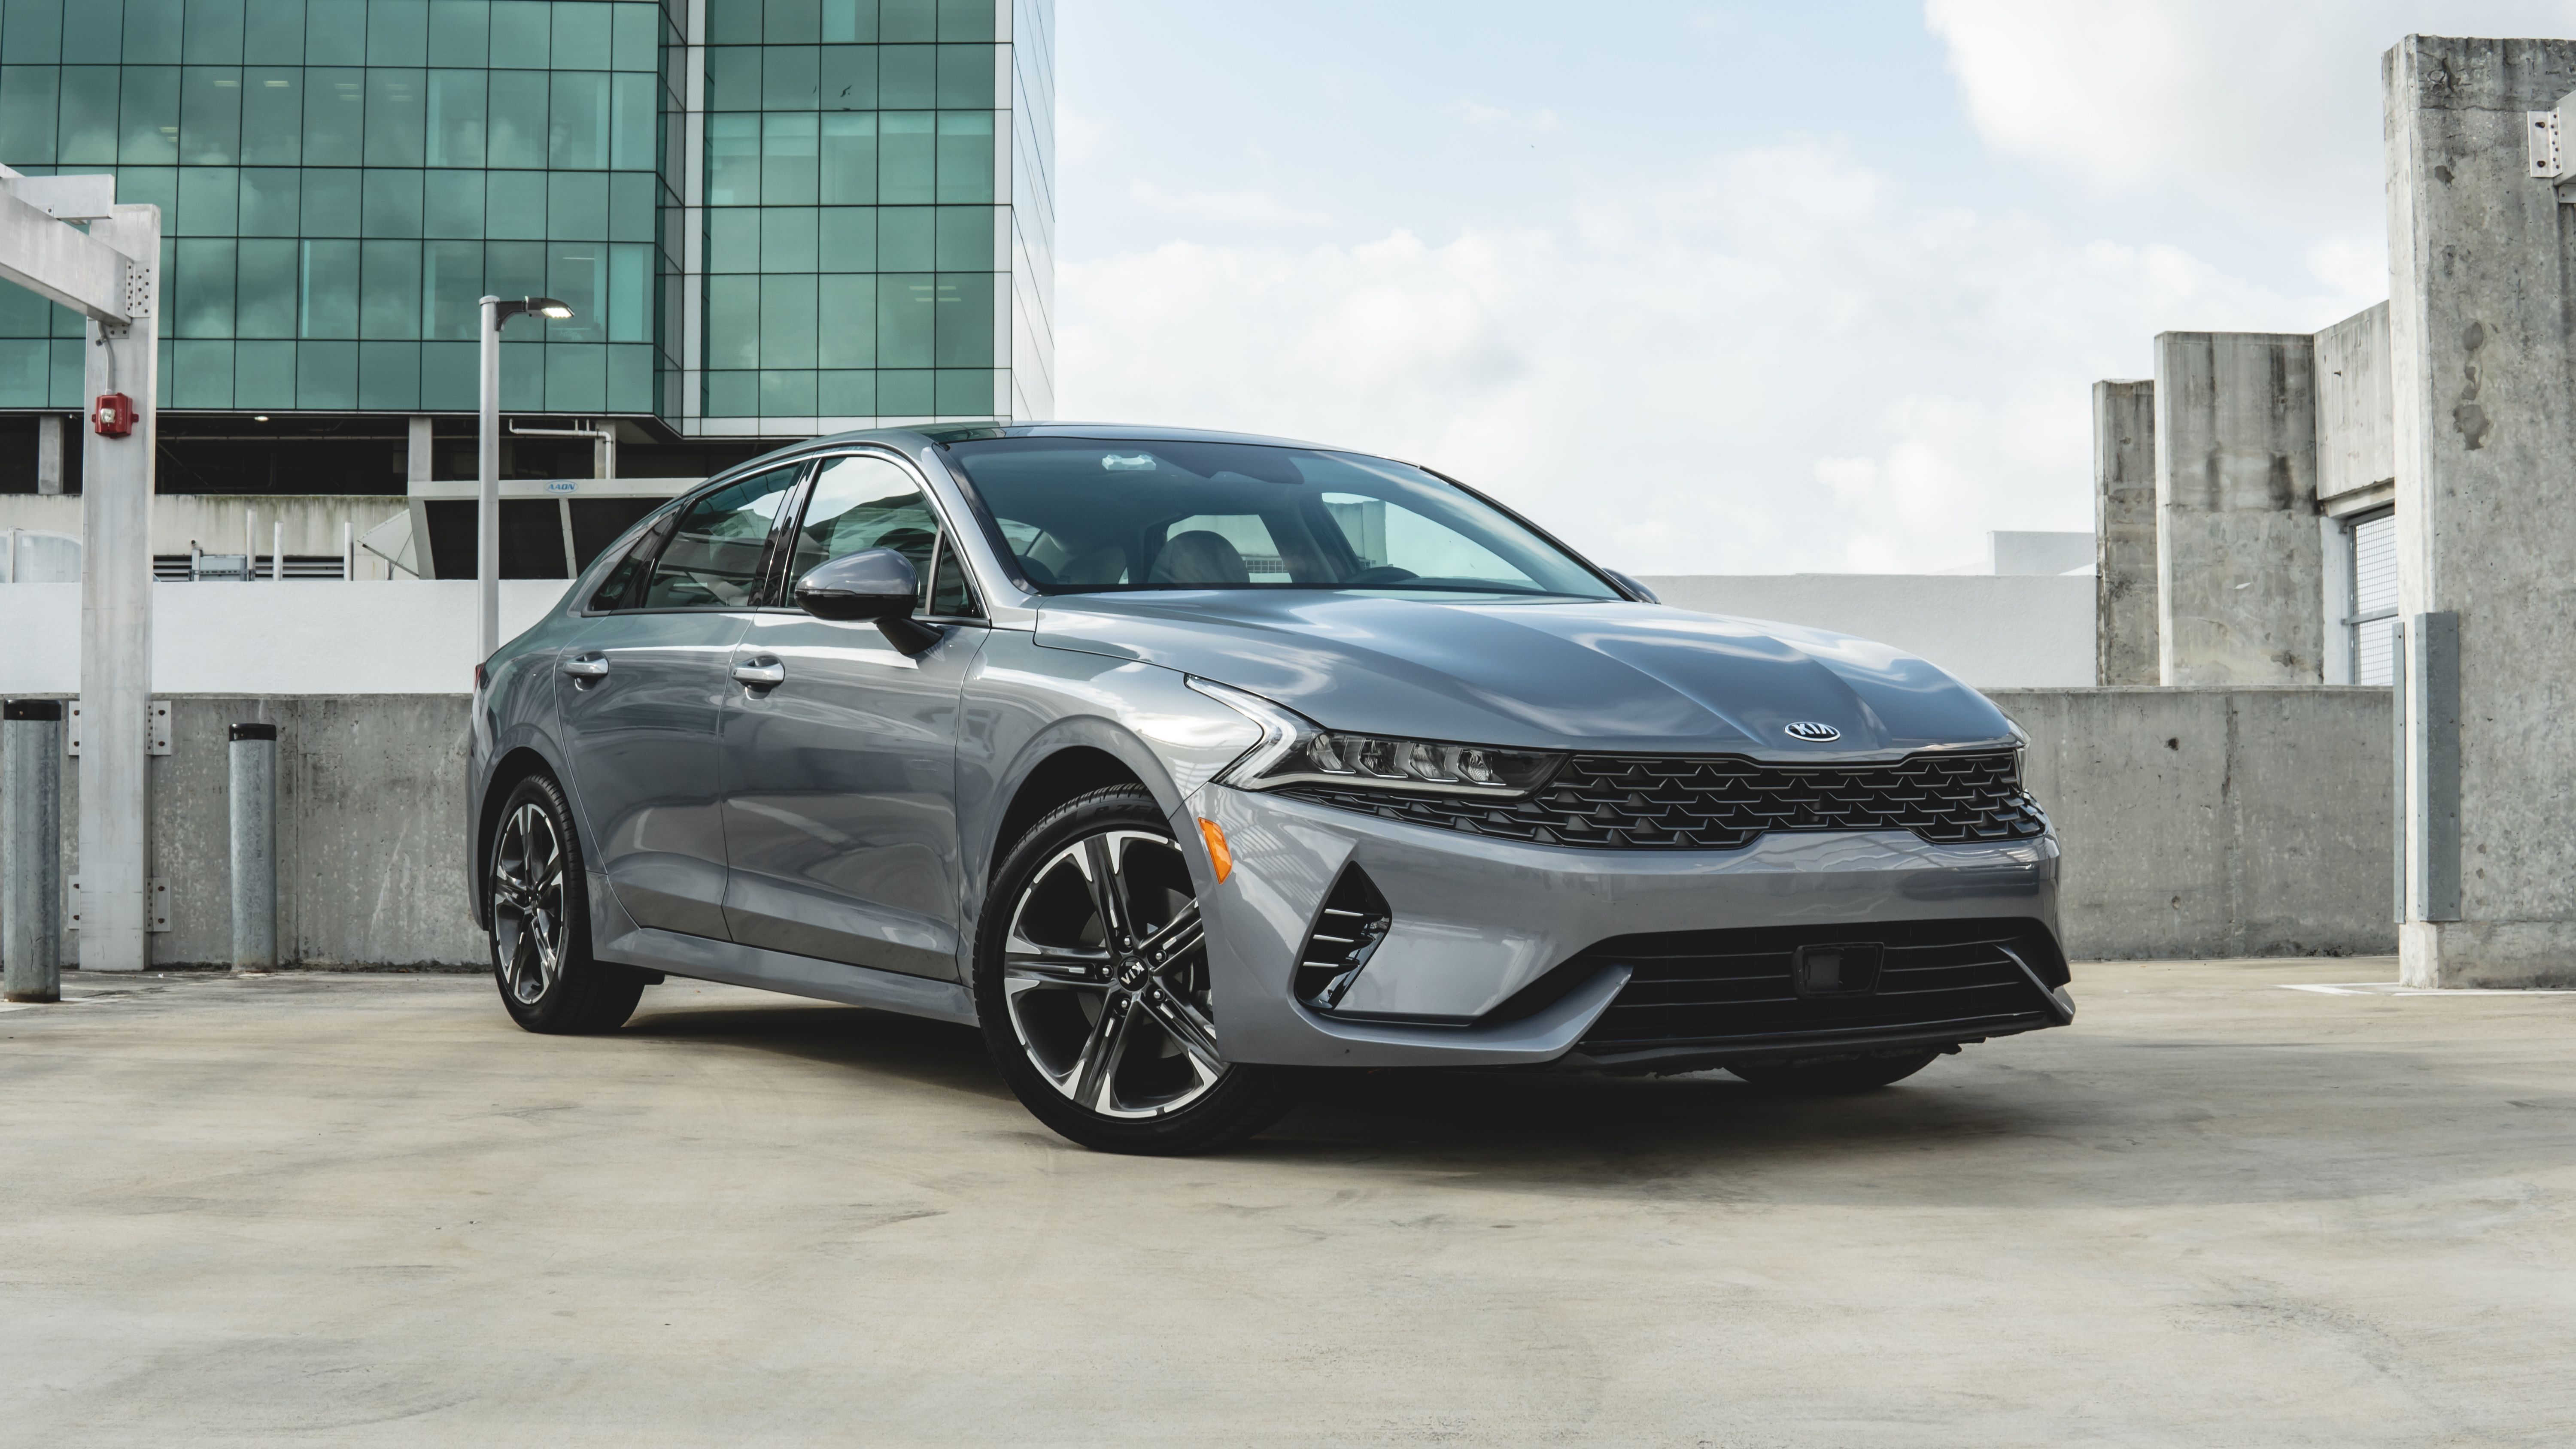 2021 Kia K5 Review: An Affordable Midsize Sedan You'll Actually Want To ...